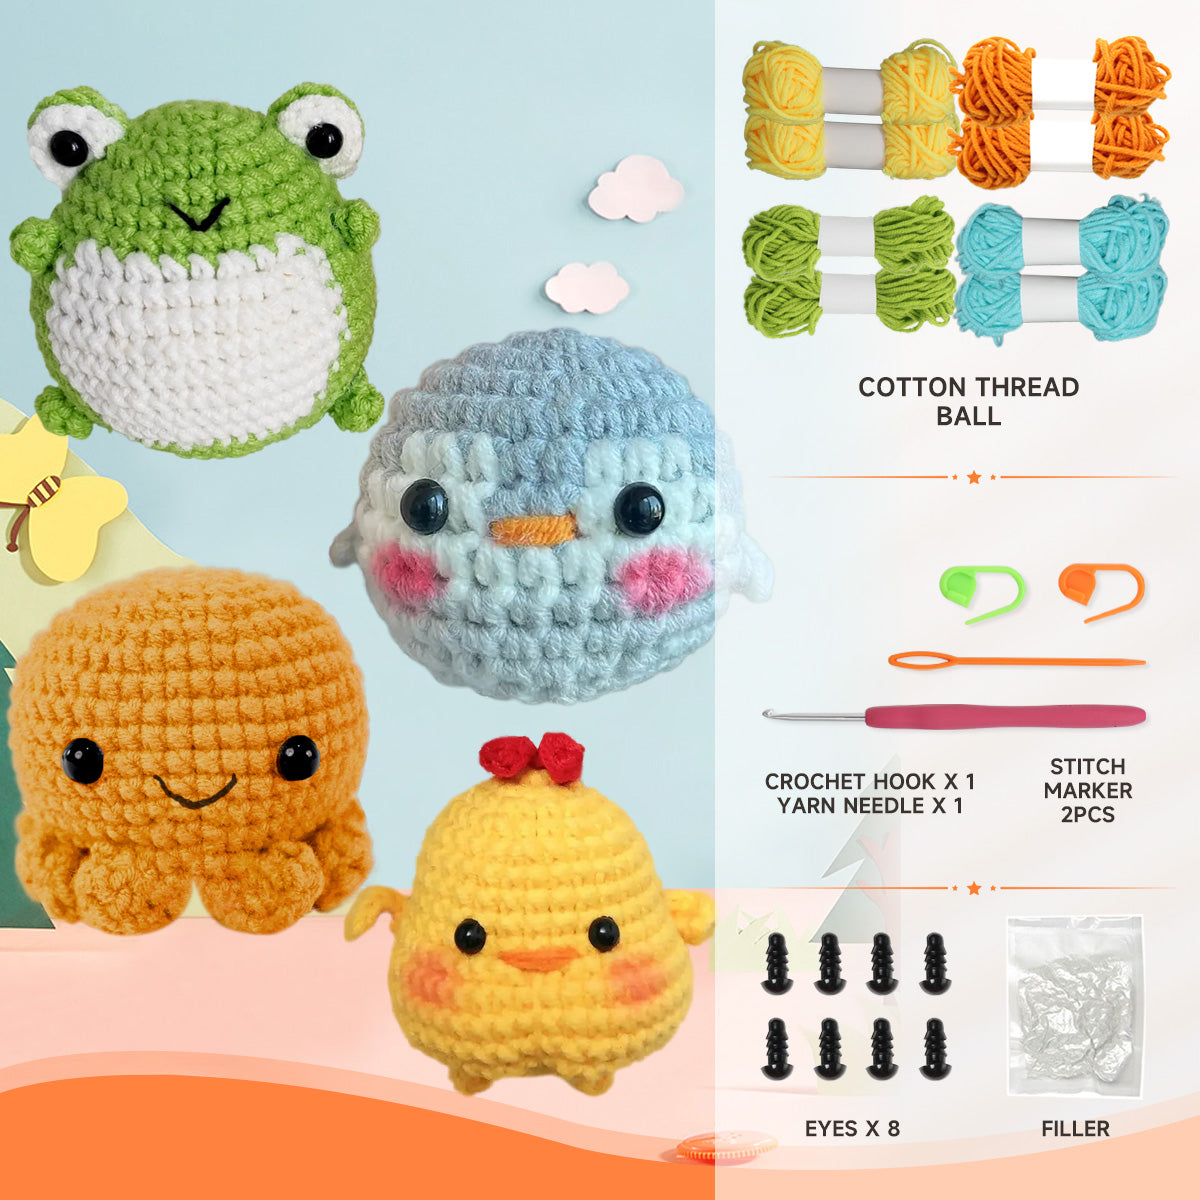 4PCS DIY Animal Crochet Kit with Step-by-Step Video Tutorials – yamaxin